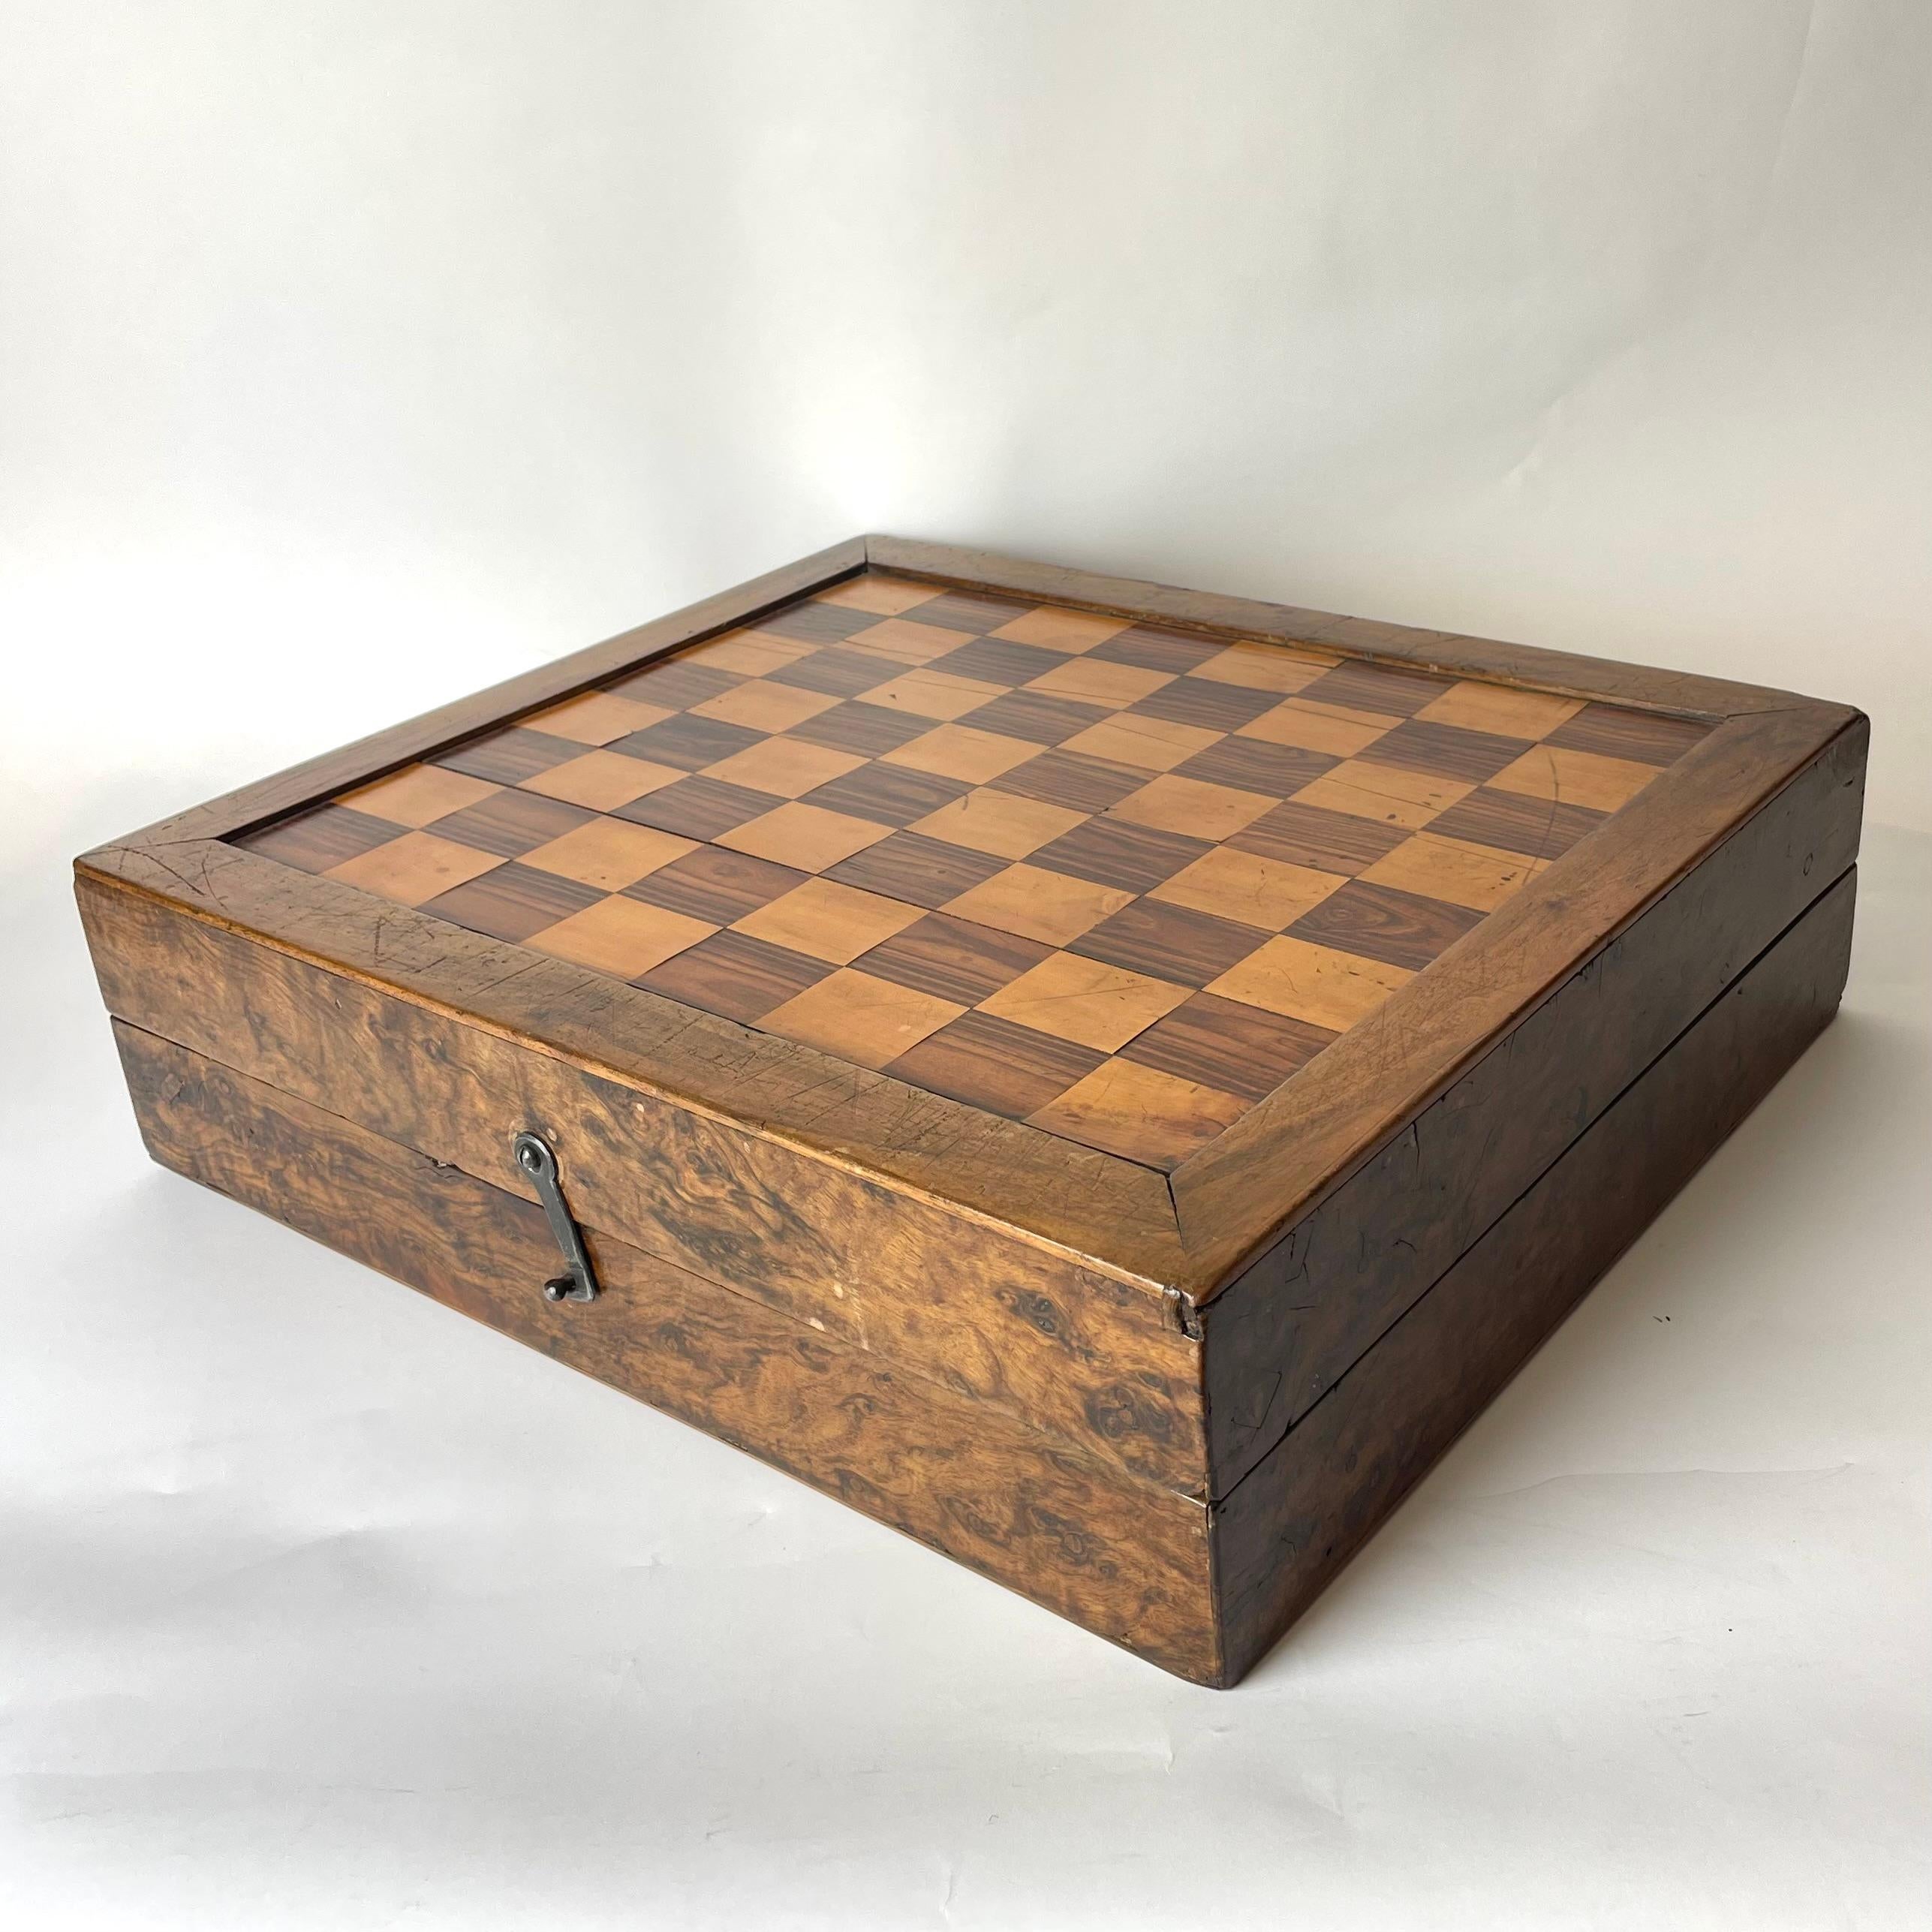 A beautiful Late Baroque Box used for Chess/Backgammon and Nine Men’s Morris Game pieces. Rich interior and exterior decorated with different types of wood, including olive, walnut and birch. Late 17th Century/Early 18th Century.

This charming